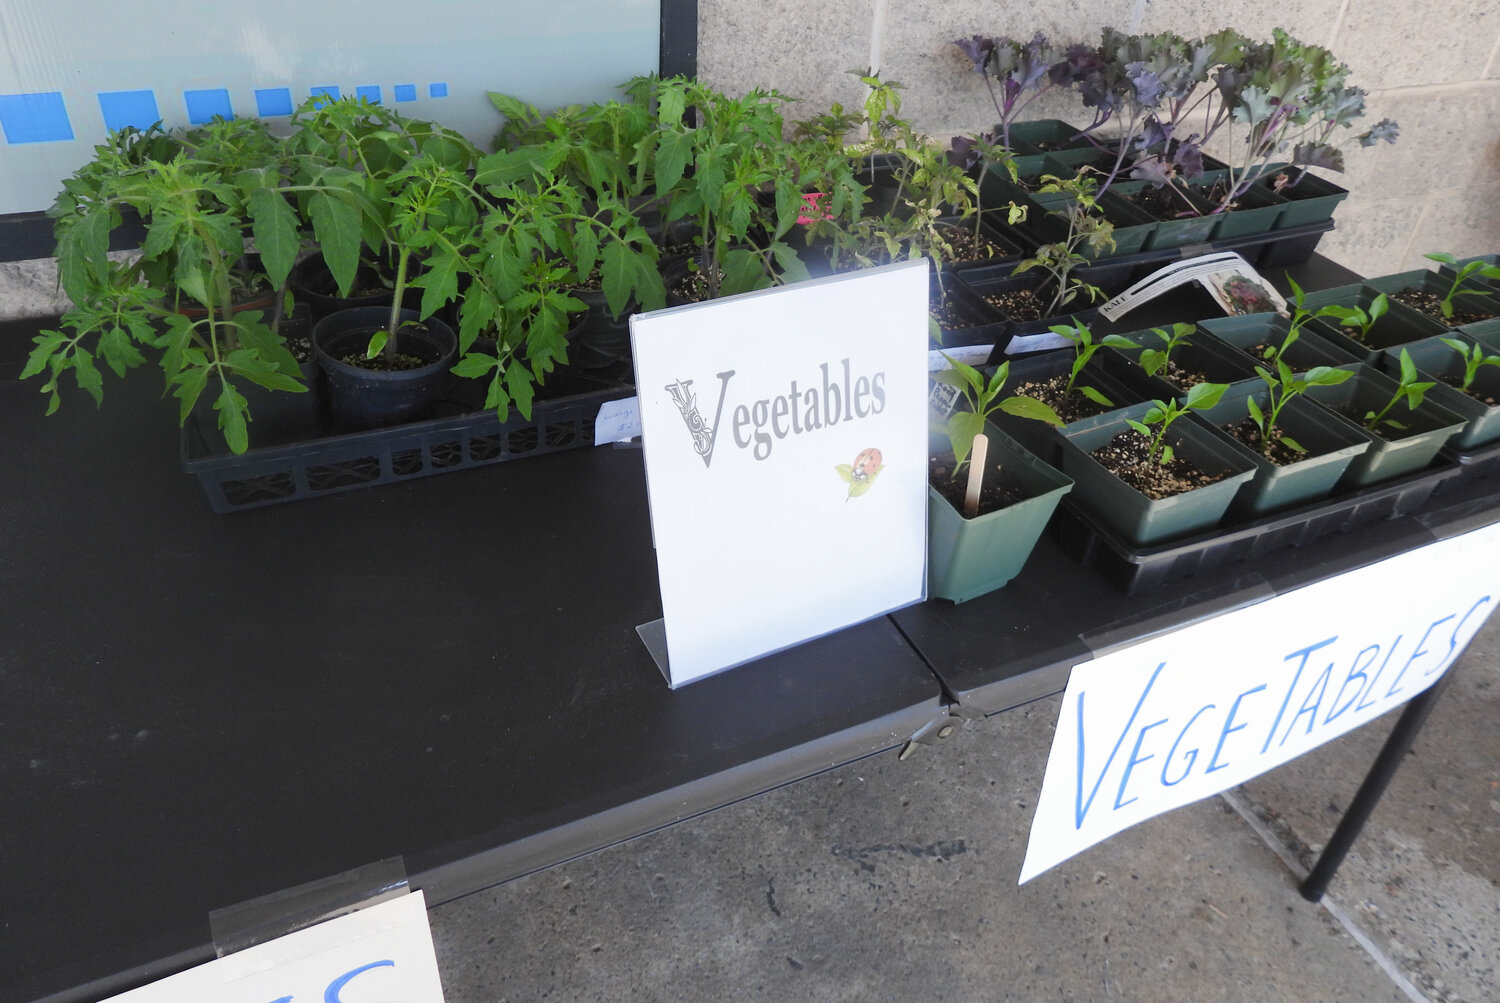 A number of vegetables, flowers, herbs, and all manner of other plants hand grown by Club members were on sale.